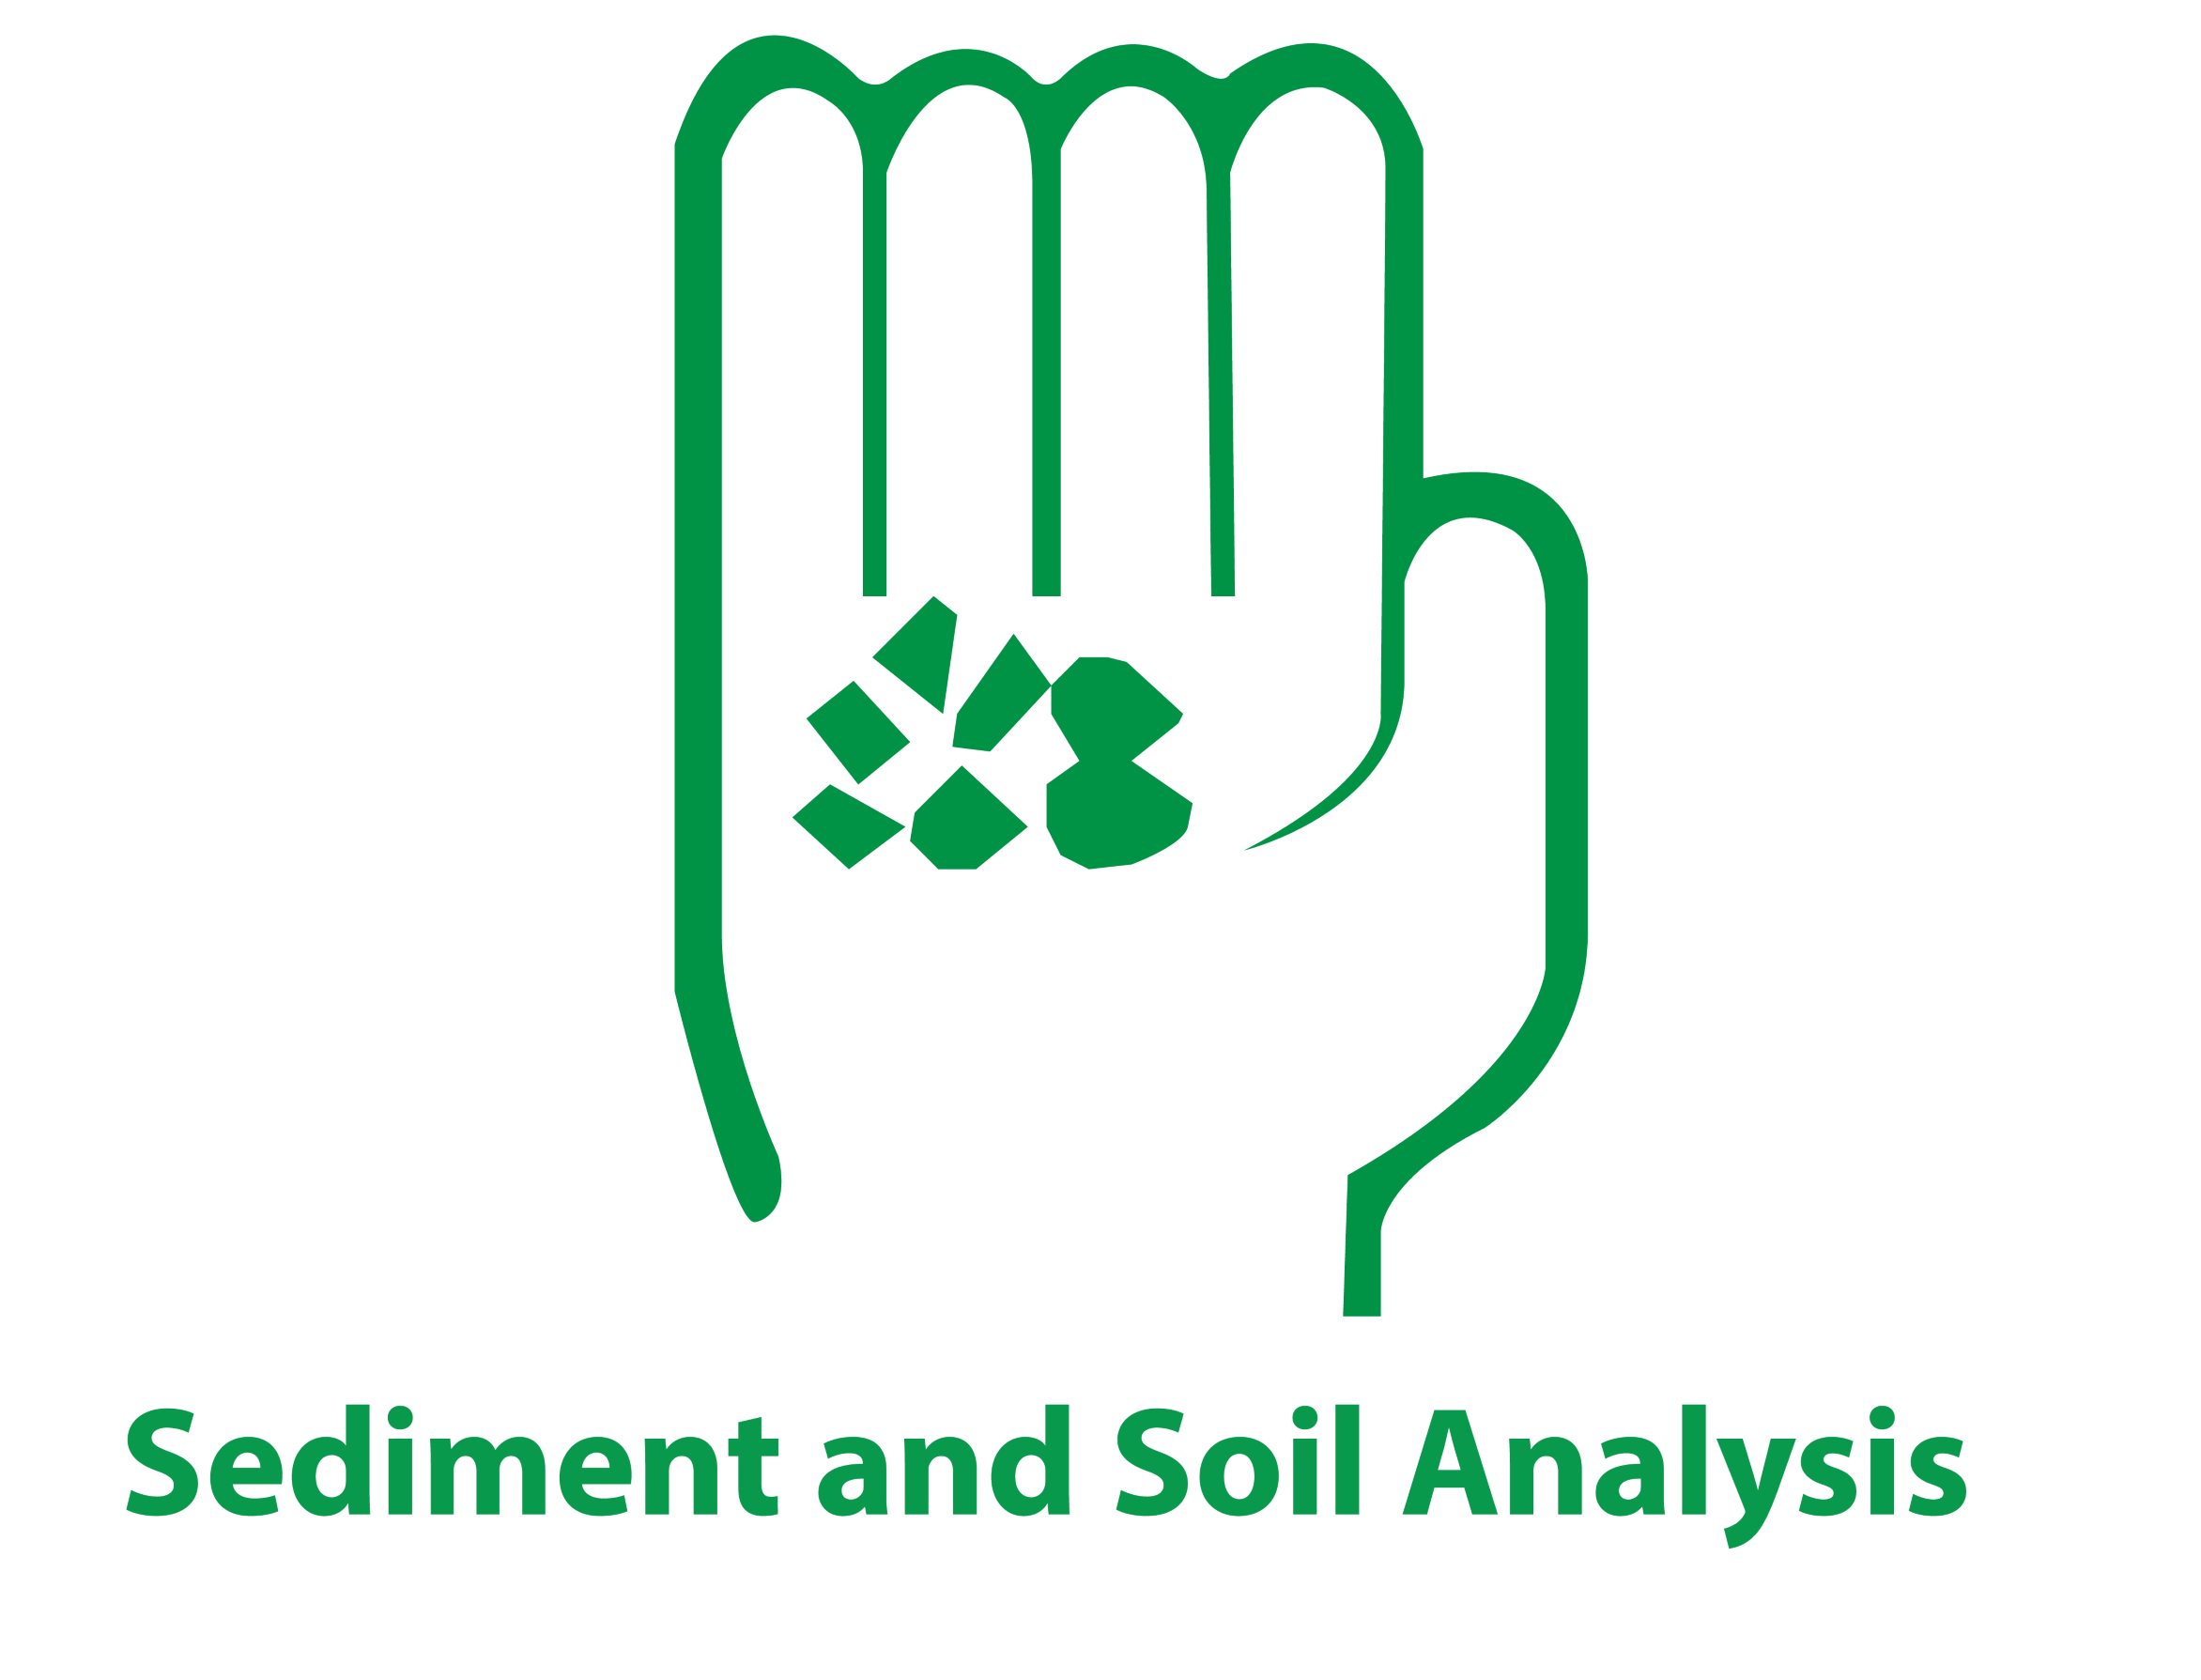 Sediment and Soil Analysis Services